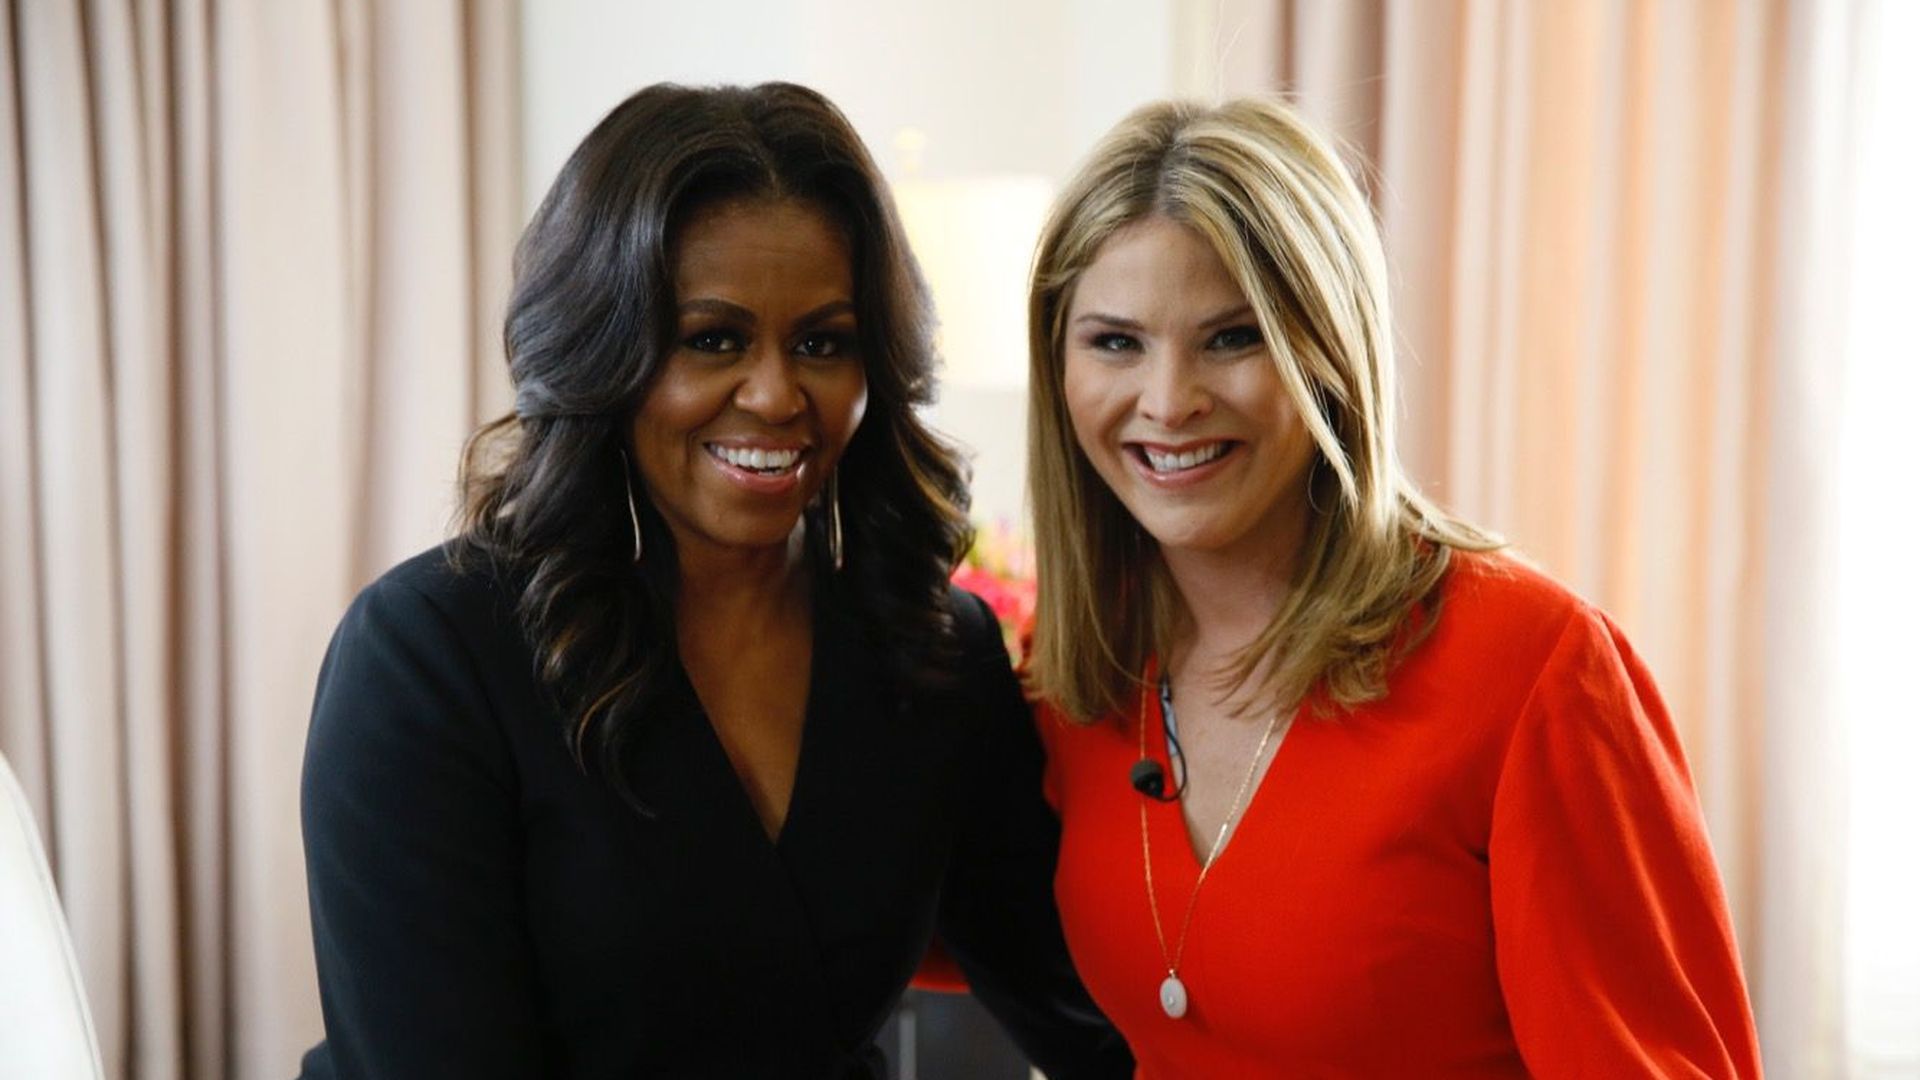 Michelle Obama and Jenna Bus